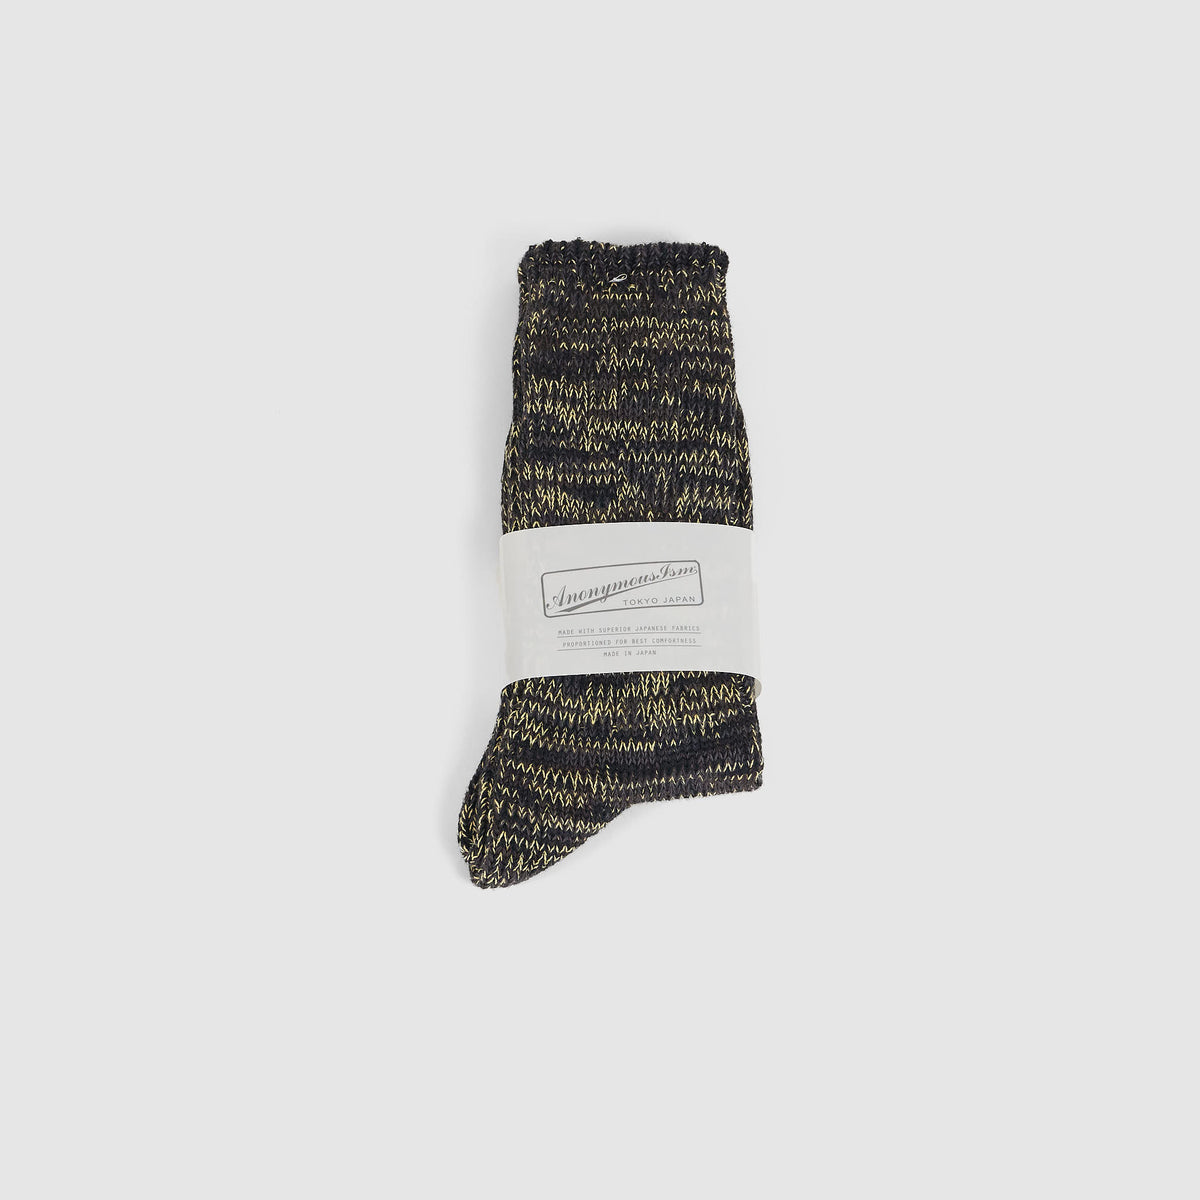 Anonymous Ism 5 Color Mix Crew Socks